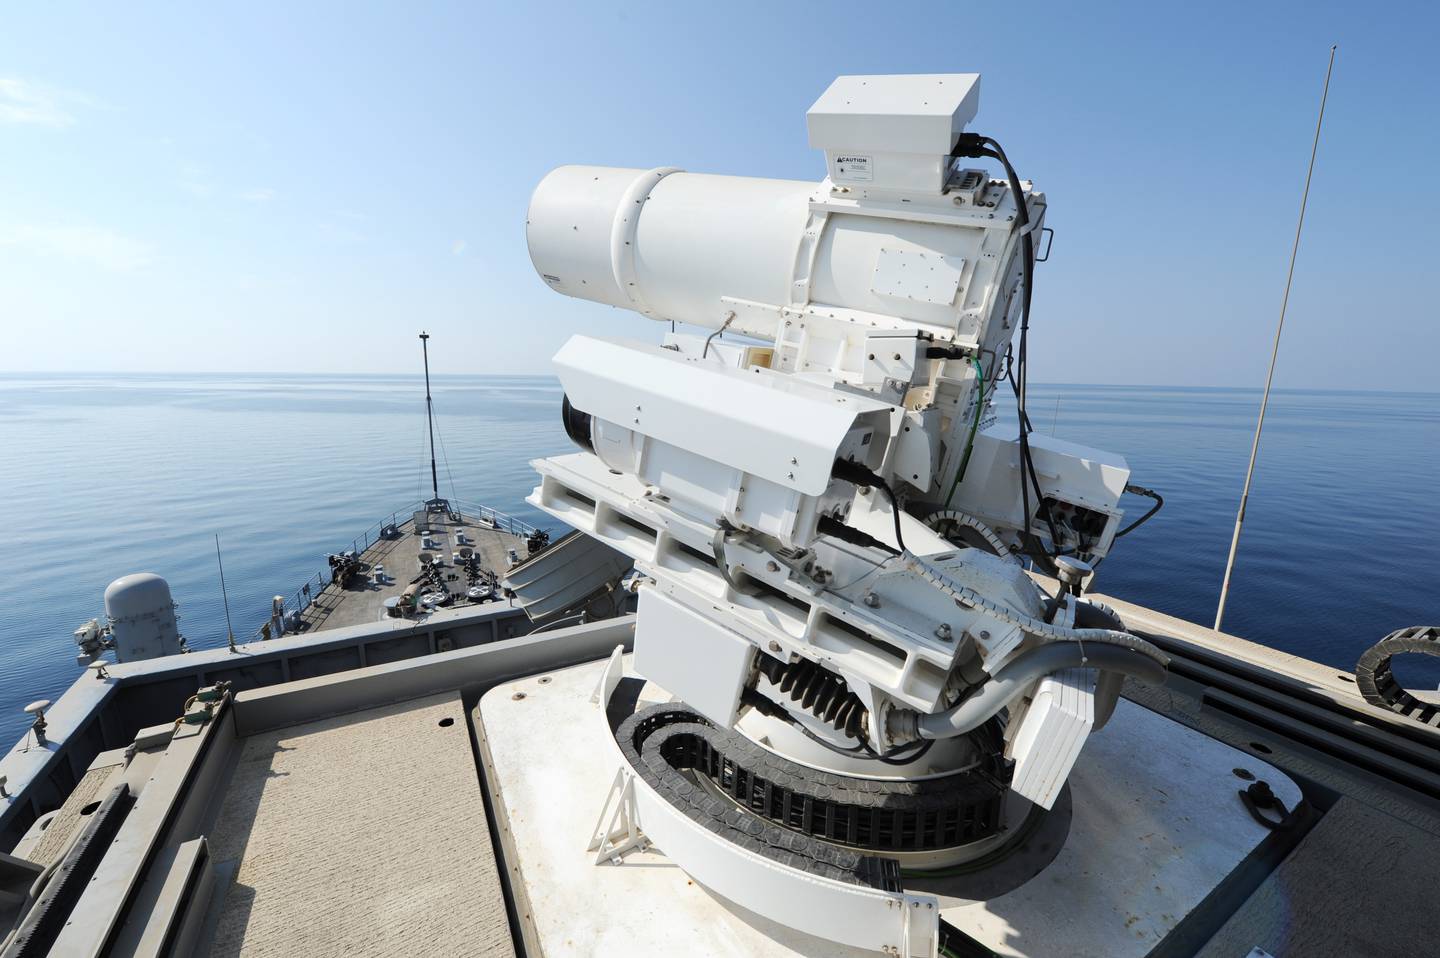 The Afloat Forward Staging Base (Interim) USS Ponce conducts a demonstration of the Office of Naval Research-sponsored Laser Weapon System while deployed to the Arabian Gulf.